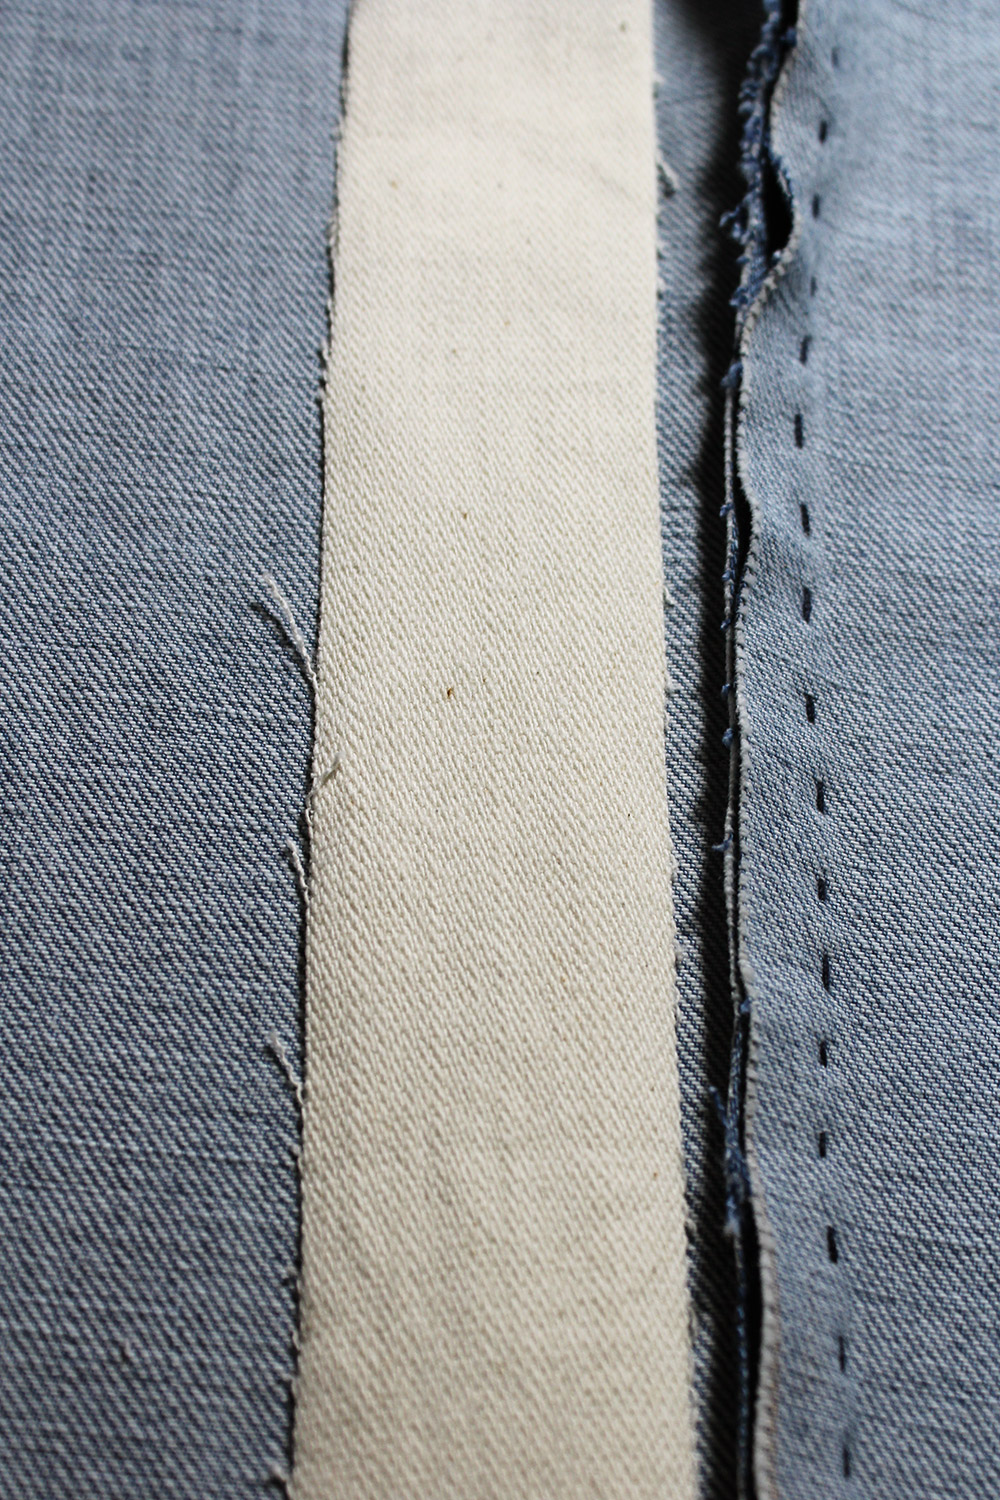 TheConcrete_WorkJacket_Washed_process_08